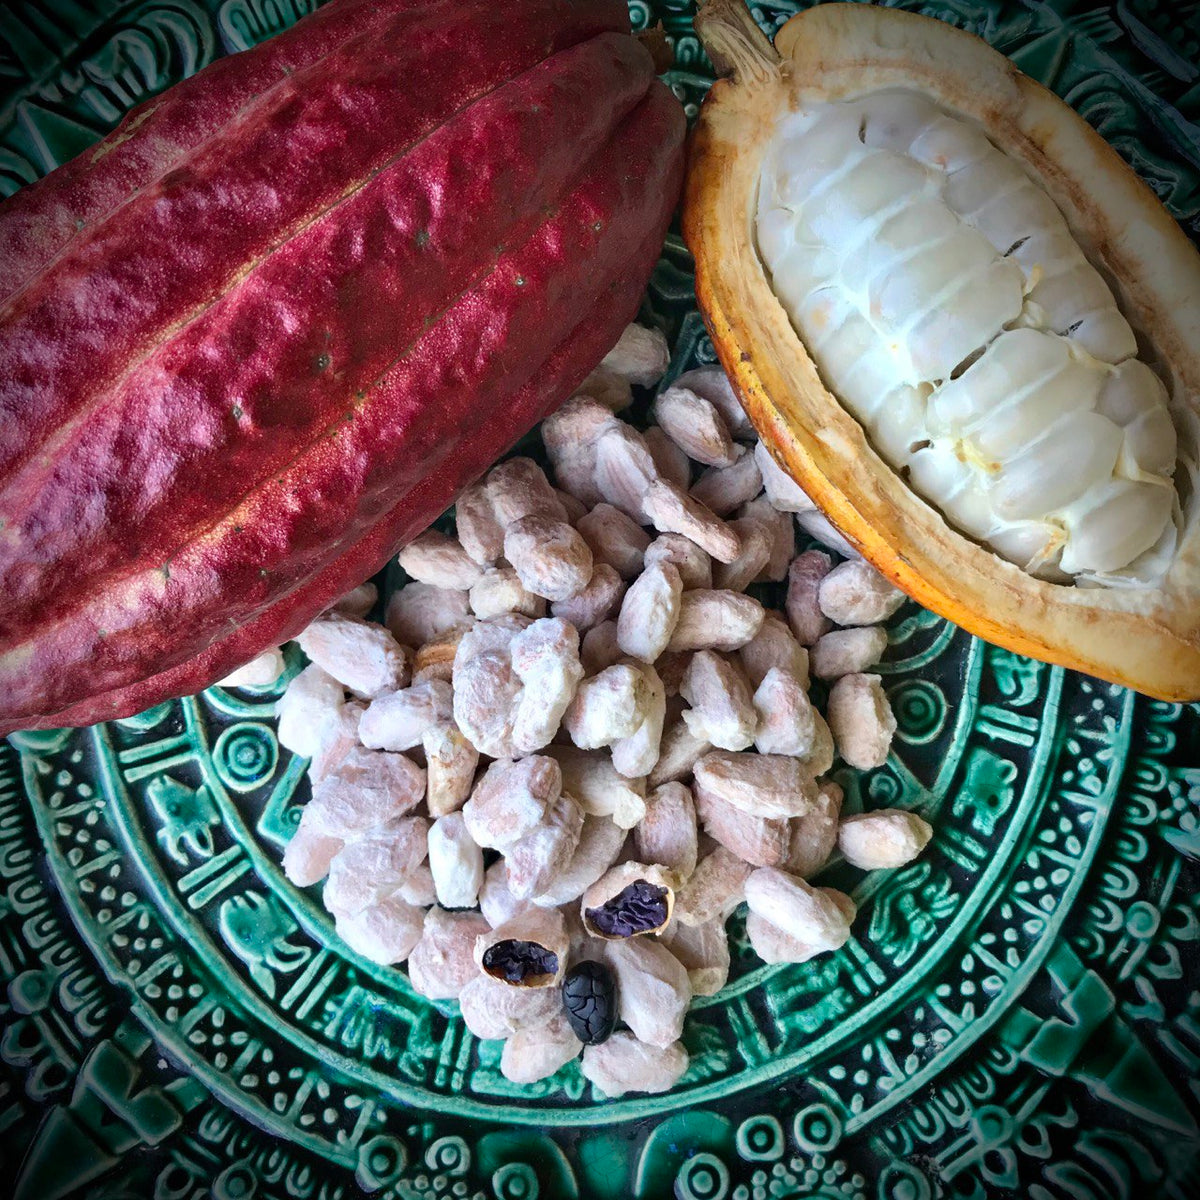 NoniLand Freeze-Dried Cacao Beans with Pulp